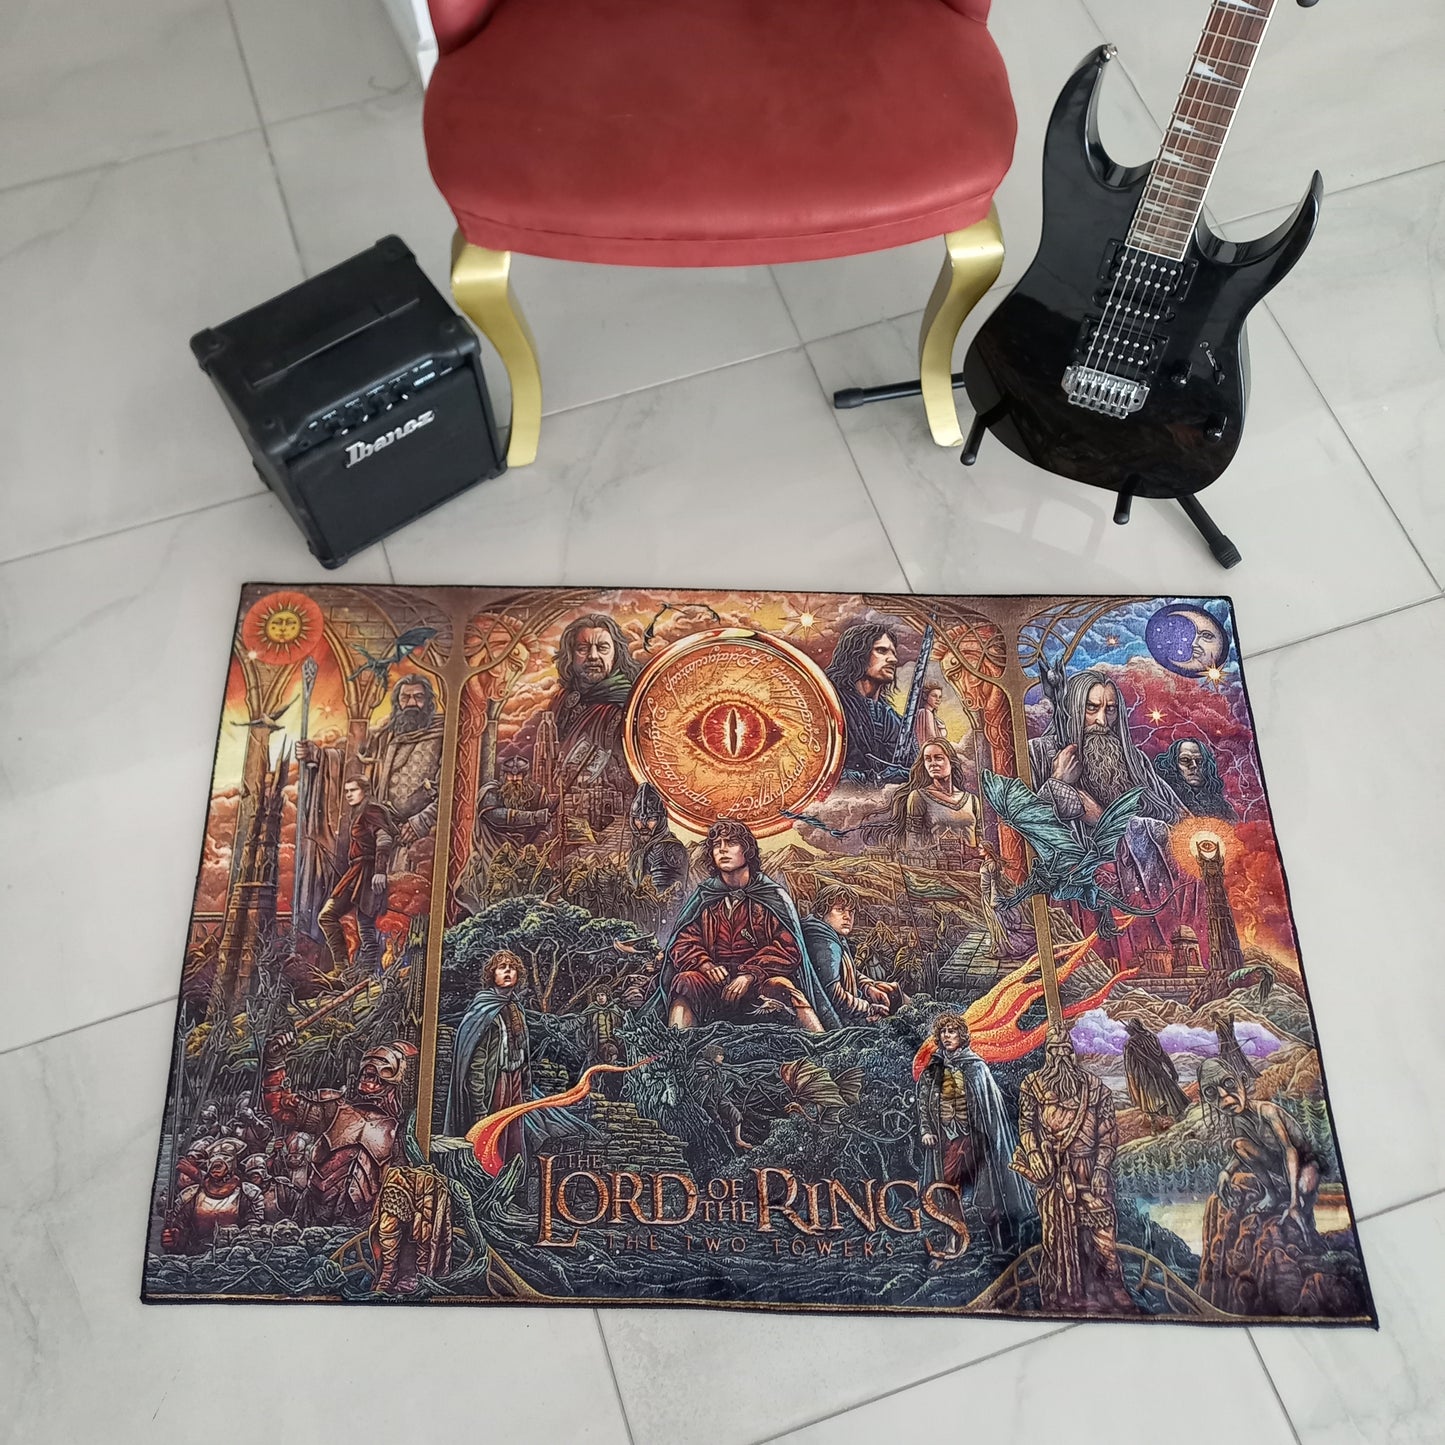 Lord of the Rings Rug - Fantastic Movie Carpet with Sauron's Eye Symbol Mat from the Greatest Science Fiction Movie